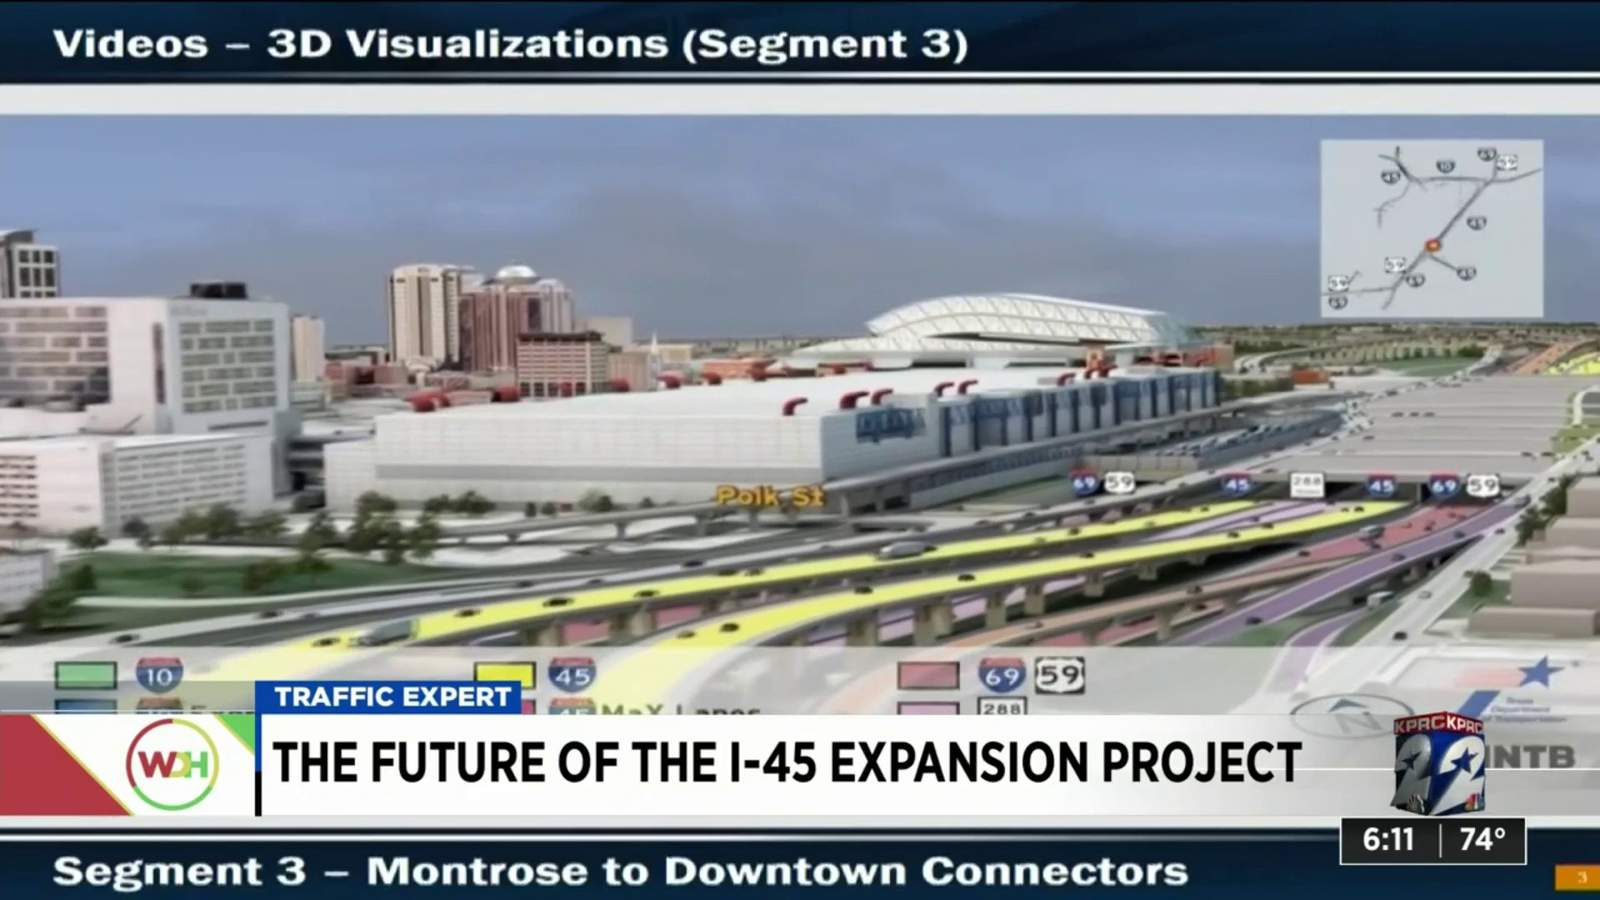 I-45 Expansion Project: Whats the latest?